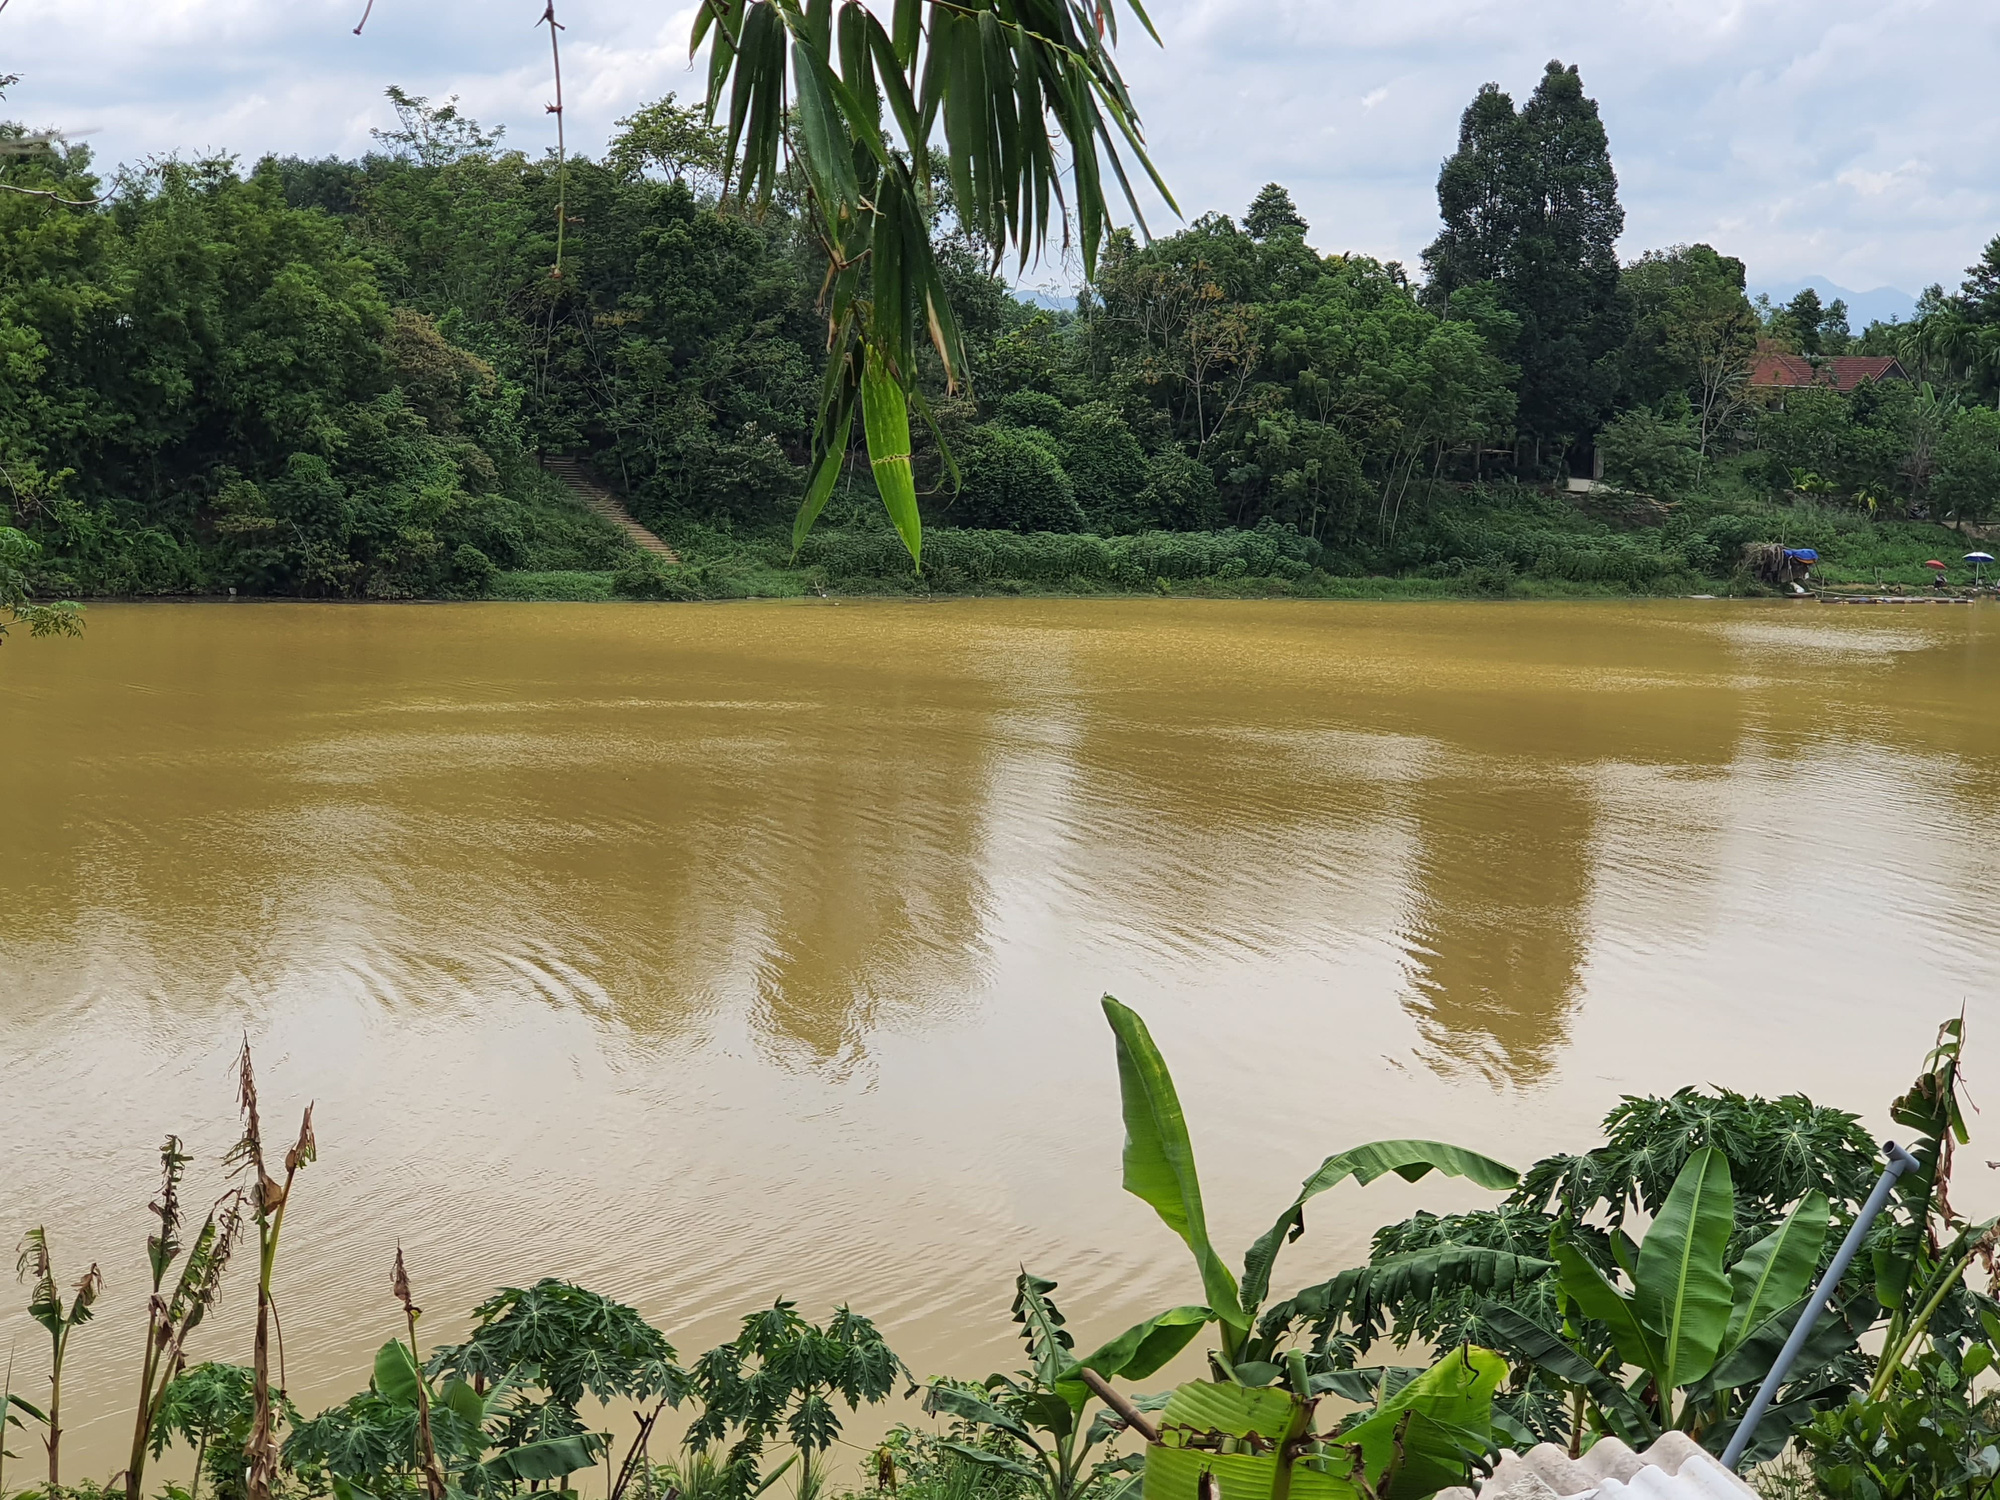 A section of the Ta Trach River turns yellow in color in Thua Thien-Hue Province, Vietnam, September 2020. Photo: Phuoc Tuan / Tuoi Tre